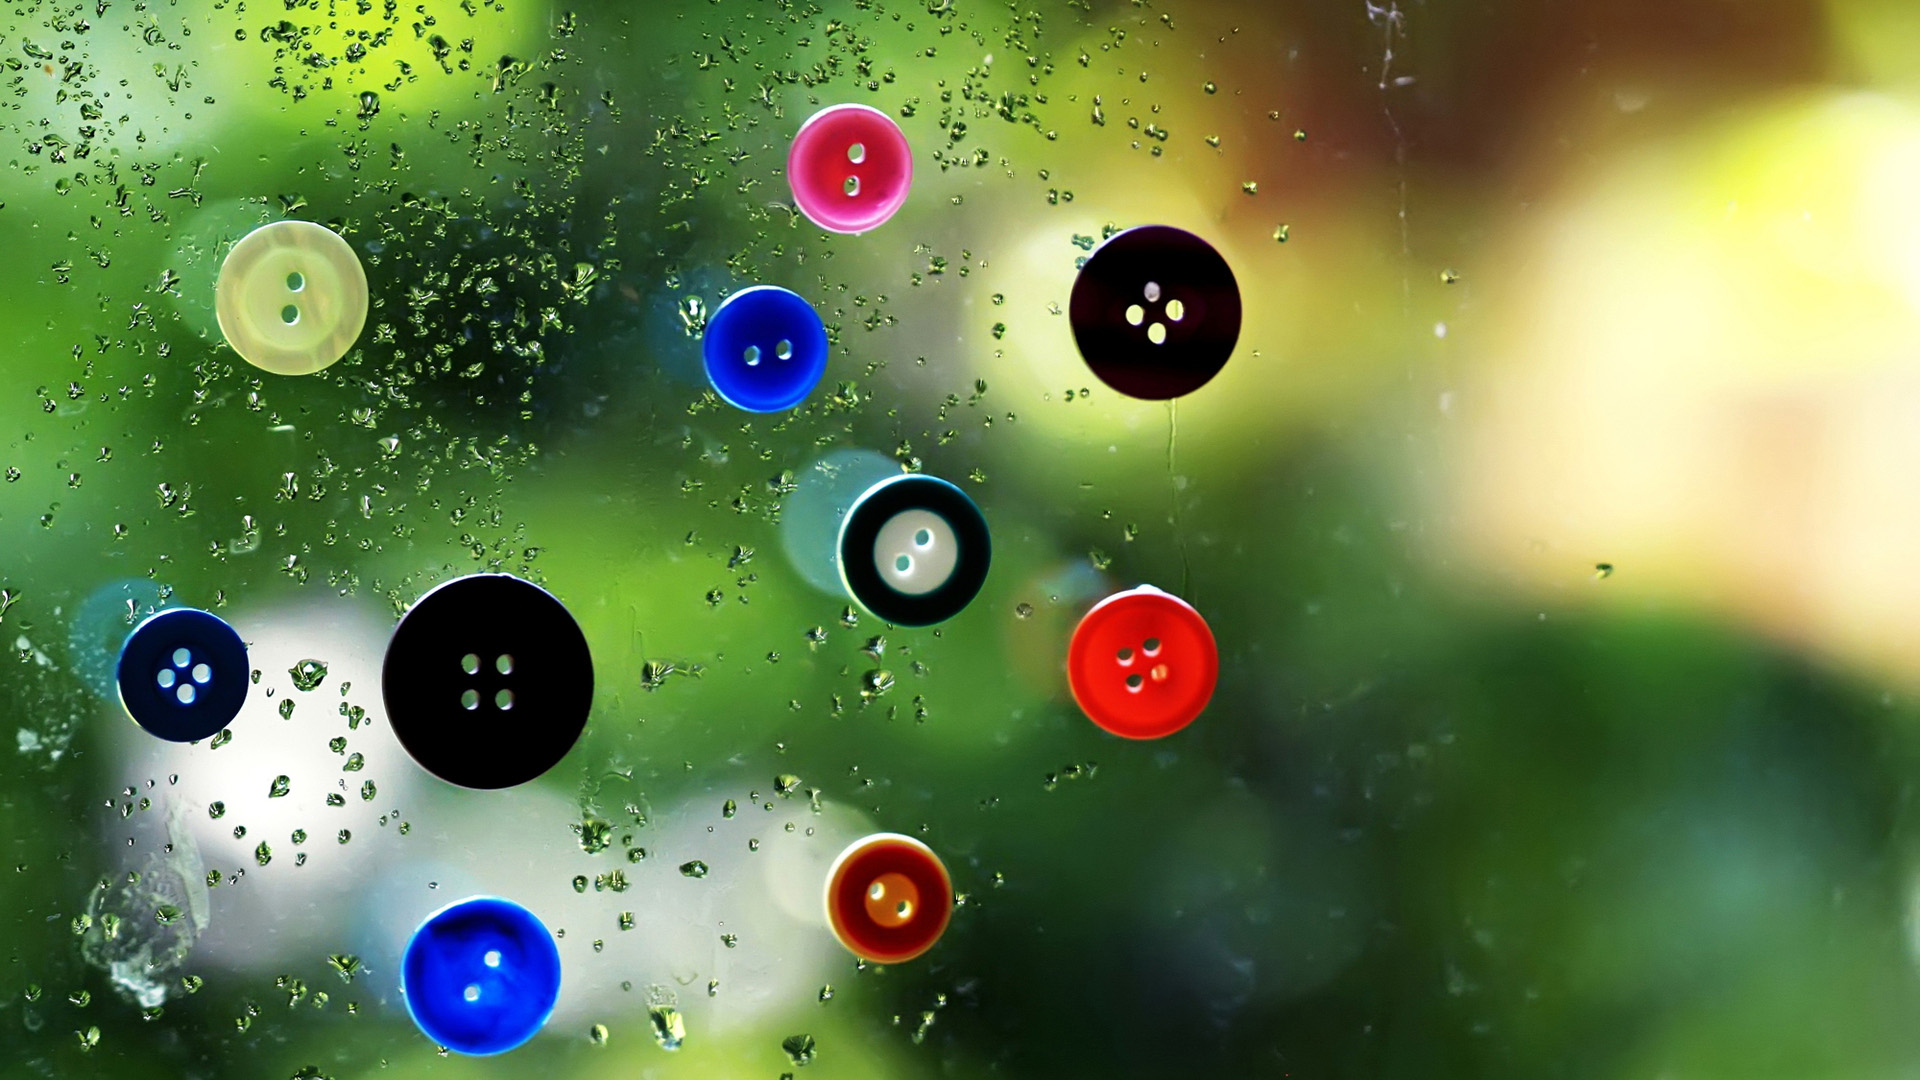 Button and glass raindrop wallpaper